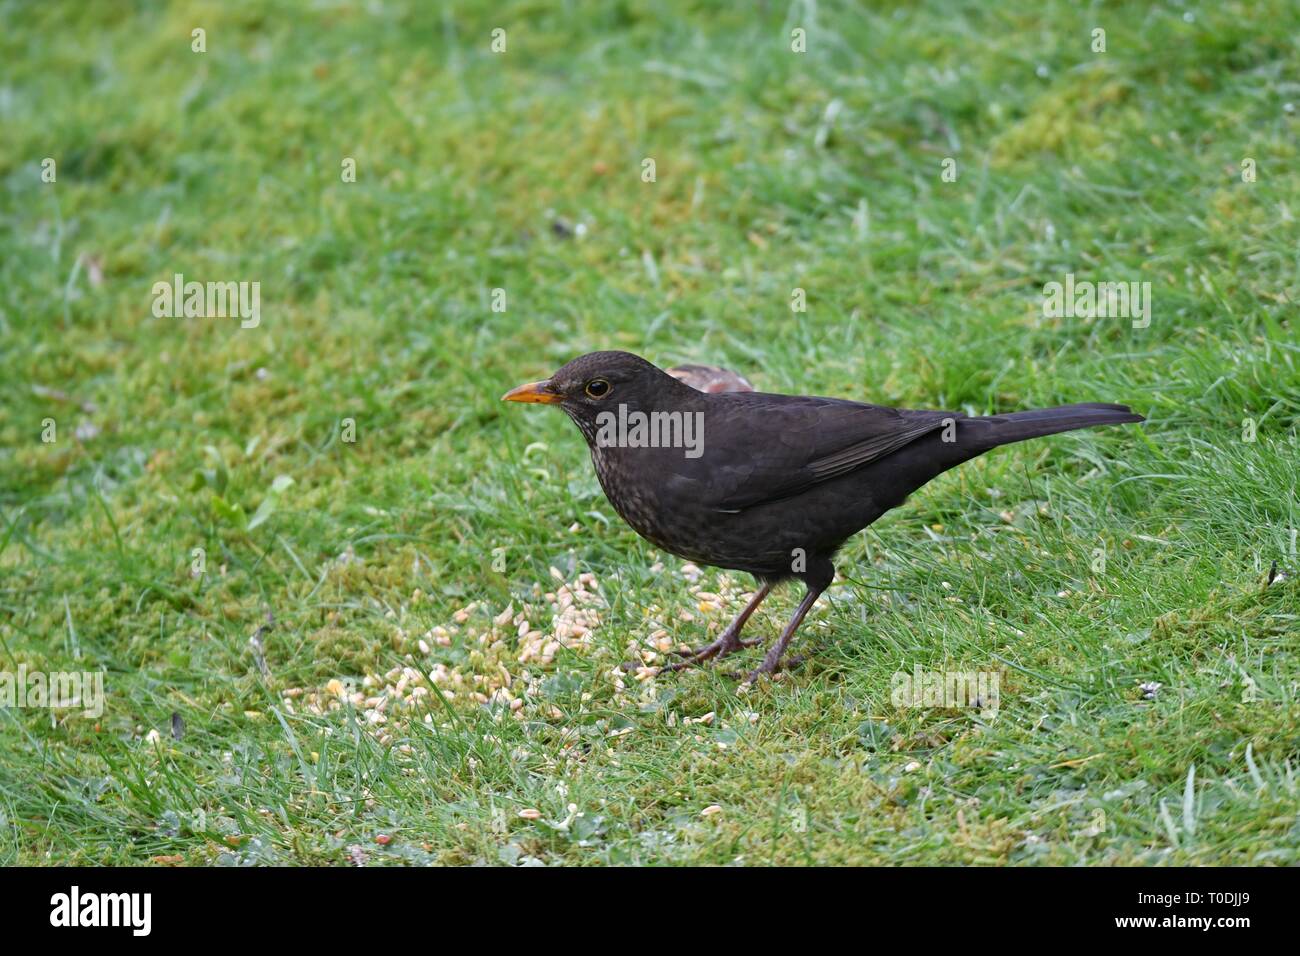 A female blackbird feeds on the grass. Blackbirds usually feed on the ground rather than from a hanging feeder. Stock Photo